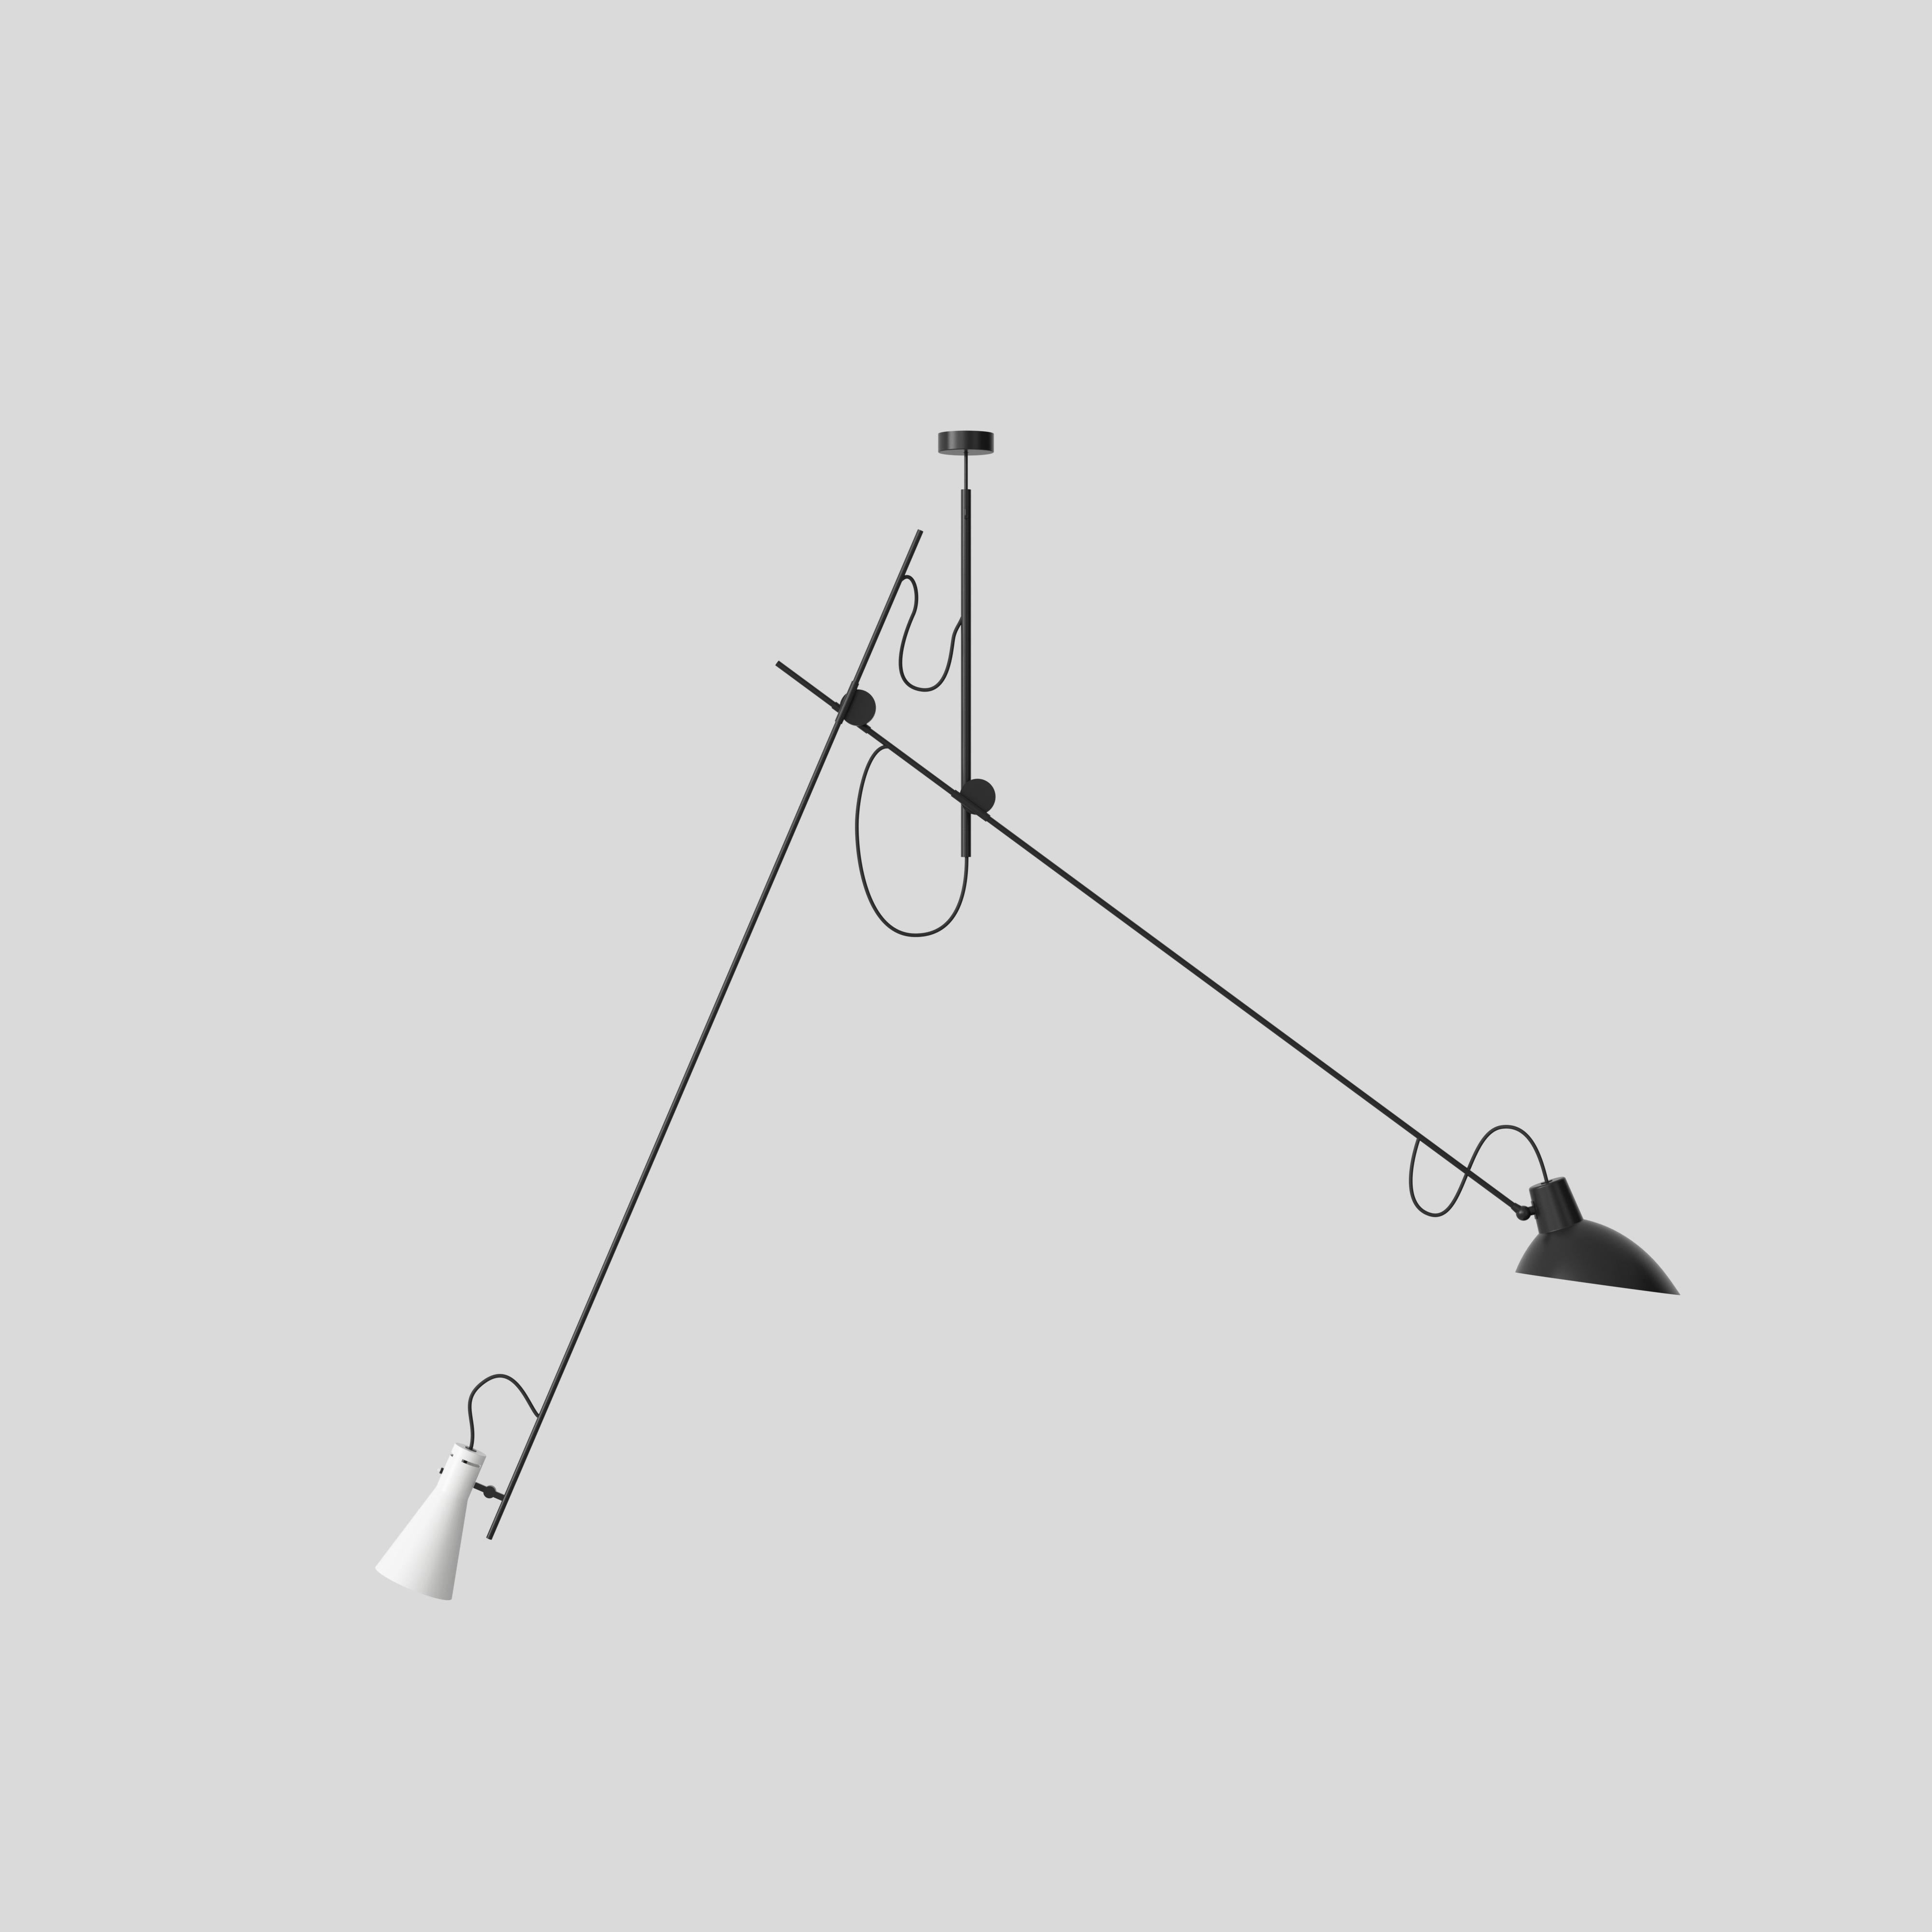 VV Cinquanta Suspension lamp
Design by Vittoriano Vigano
This version is with white and black lacquered reflectors and black frame.

The VV Cinquanta Suspension is elegant and versatile with two posable direct light sources.

With a distinctive